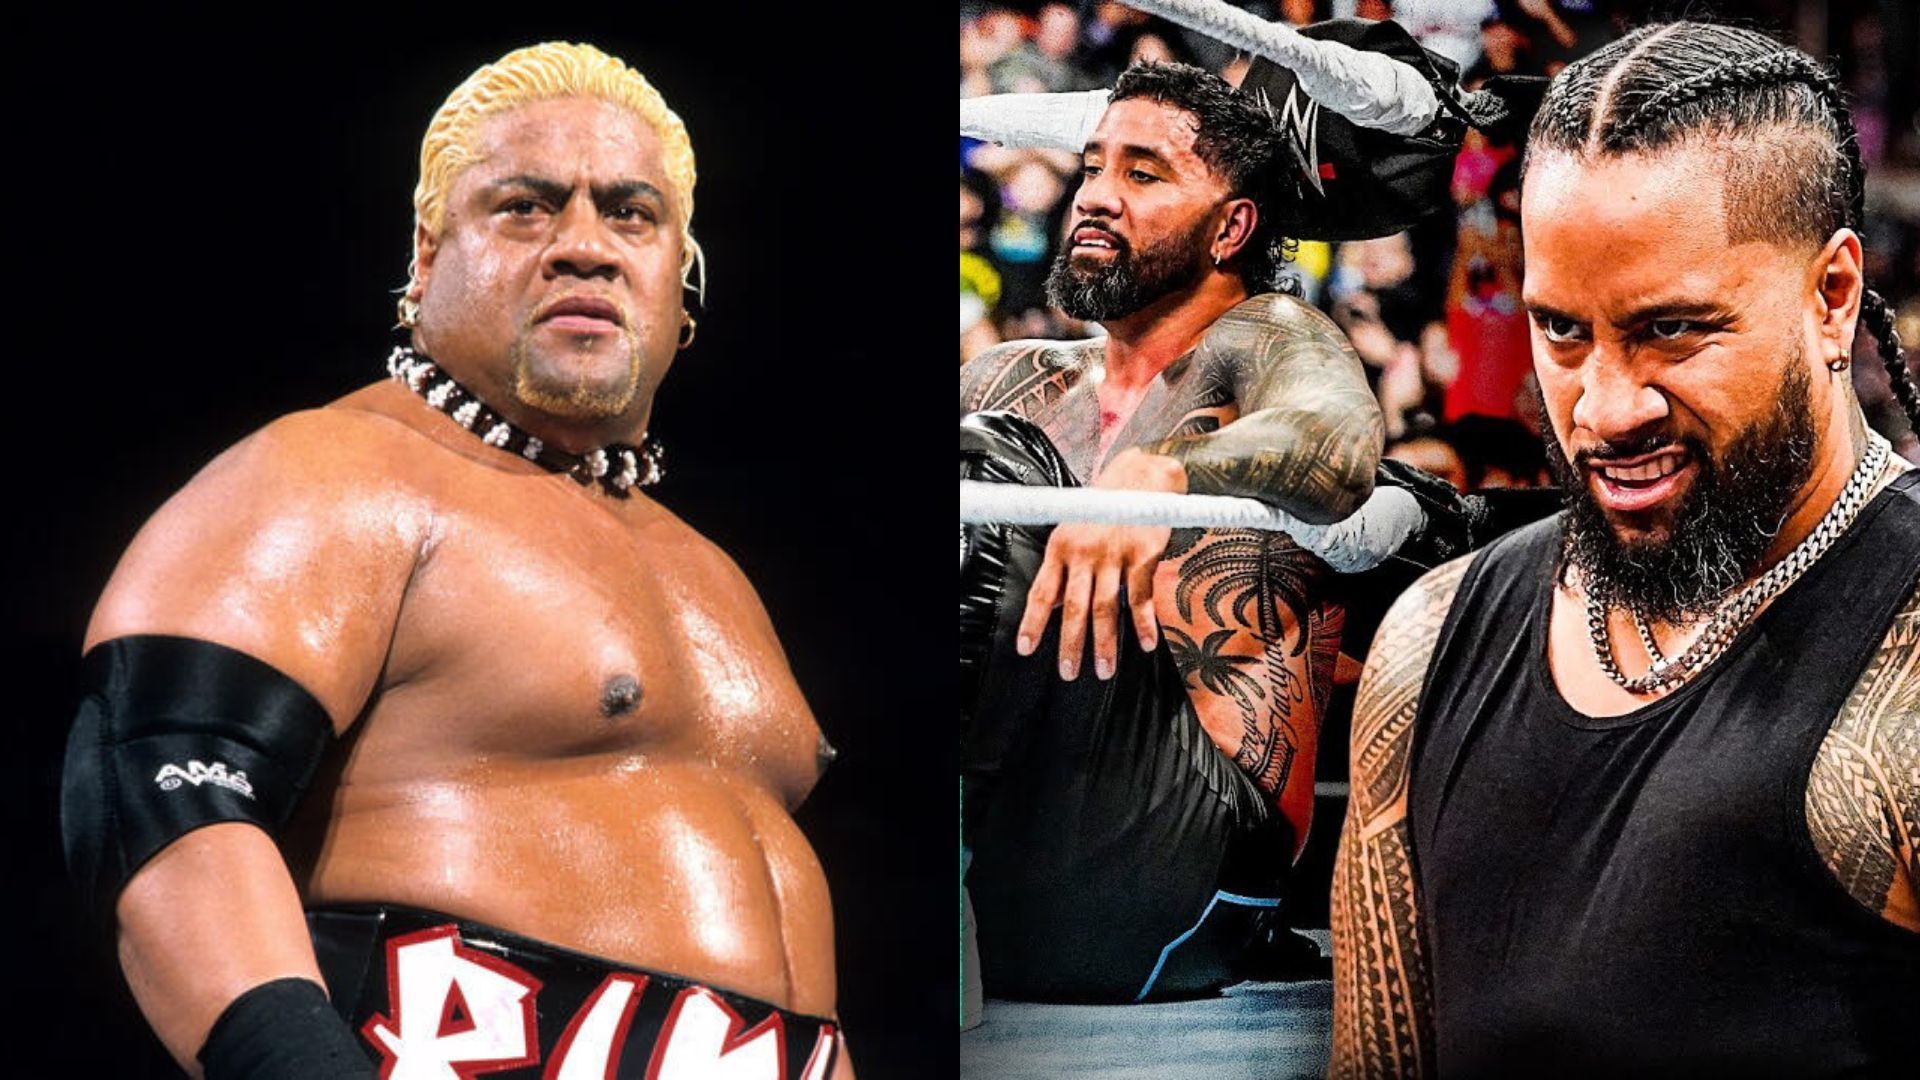 Rikishi is hyped up for Jimmy vs. Jey Uso